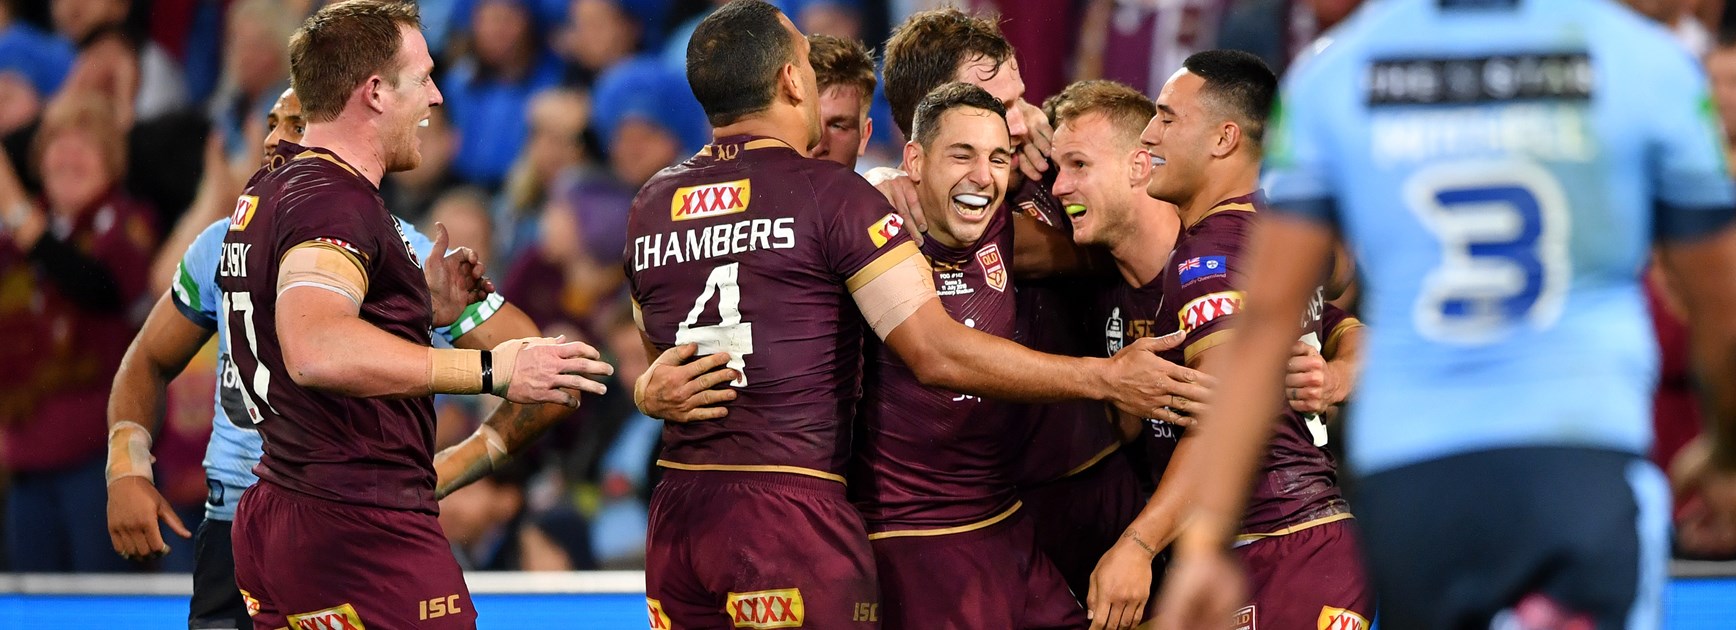 Queensland celebrate a try against NSW.